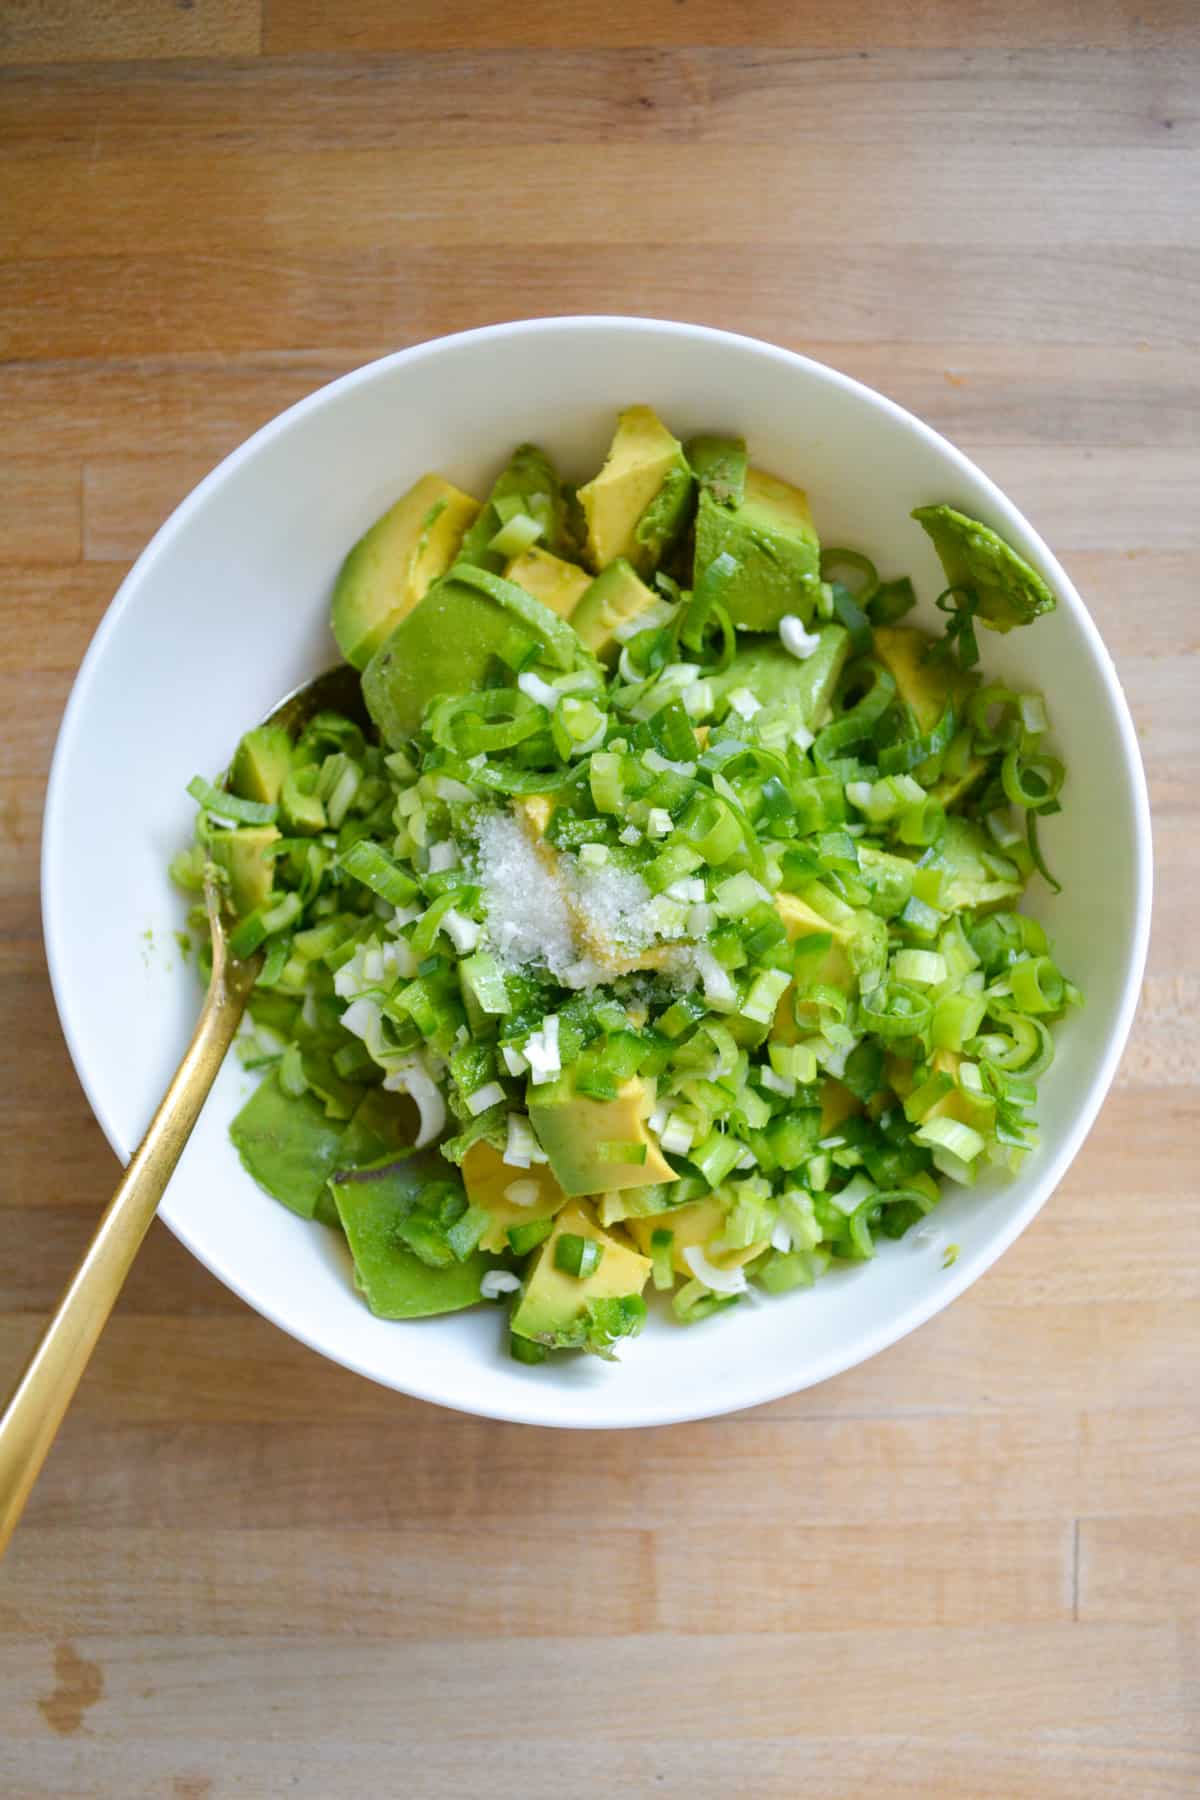 Avocado, jalapeno, spring onion, lime juice and salt in a bowl with a spoon to the left.